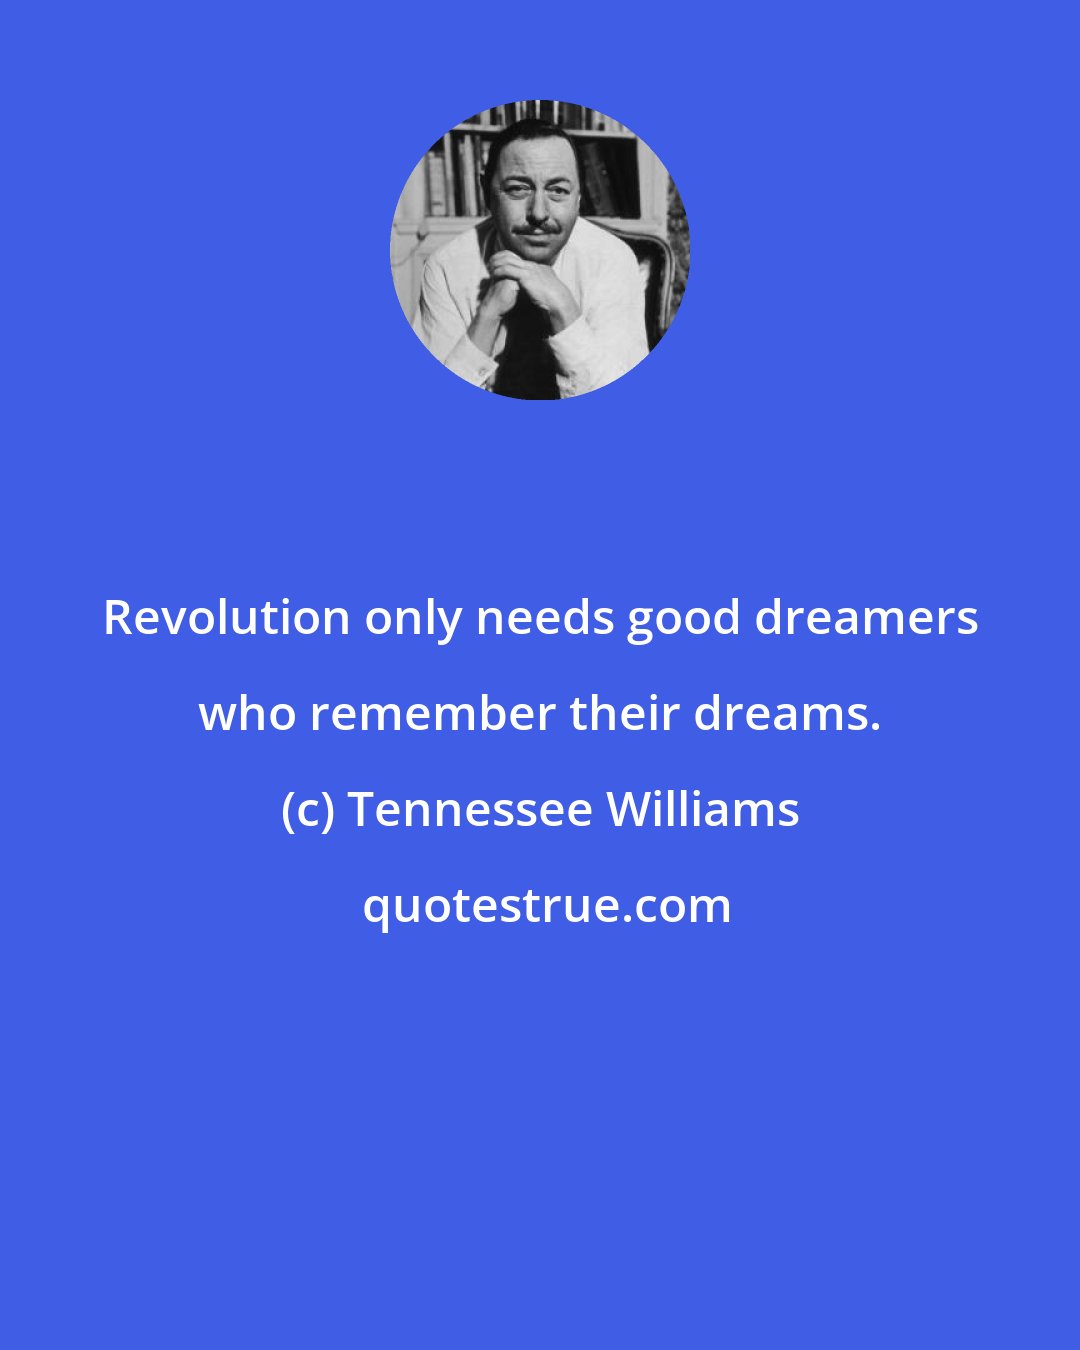 Tennessee Williams: Revolution only needs good dreamers who remember their dreams.